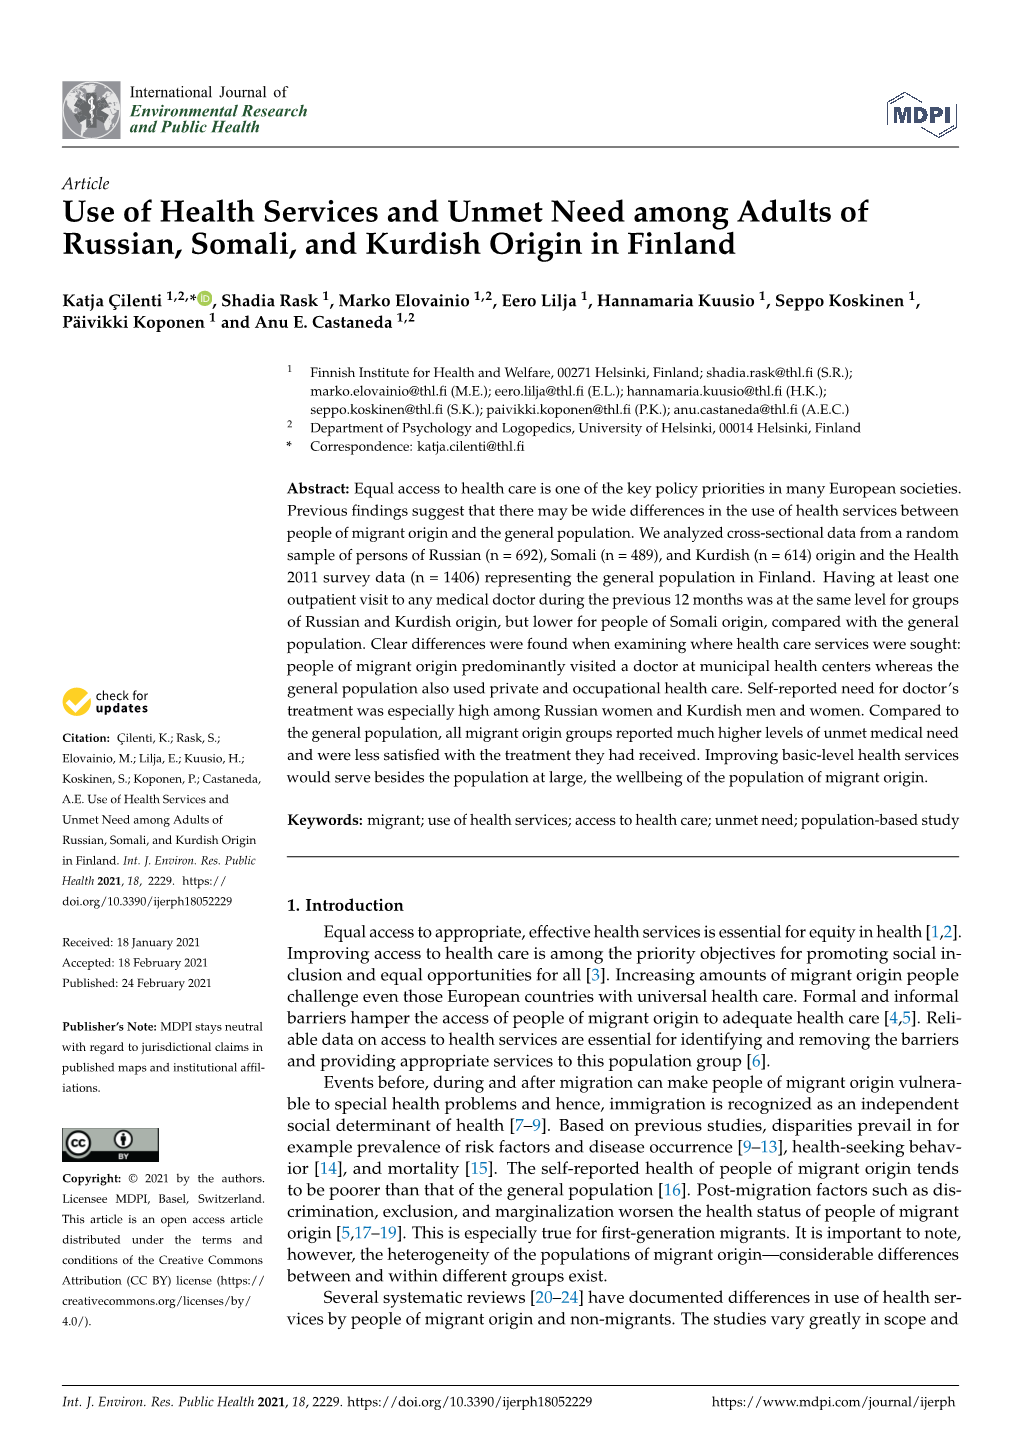 Use of Health Services and Unmet Need Among Adults of Russian, Somali, and Kurdish Origin in Finland